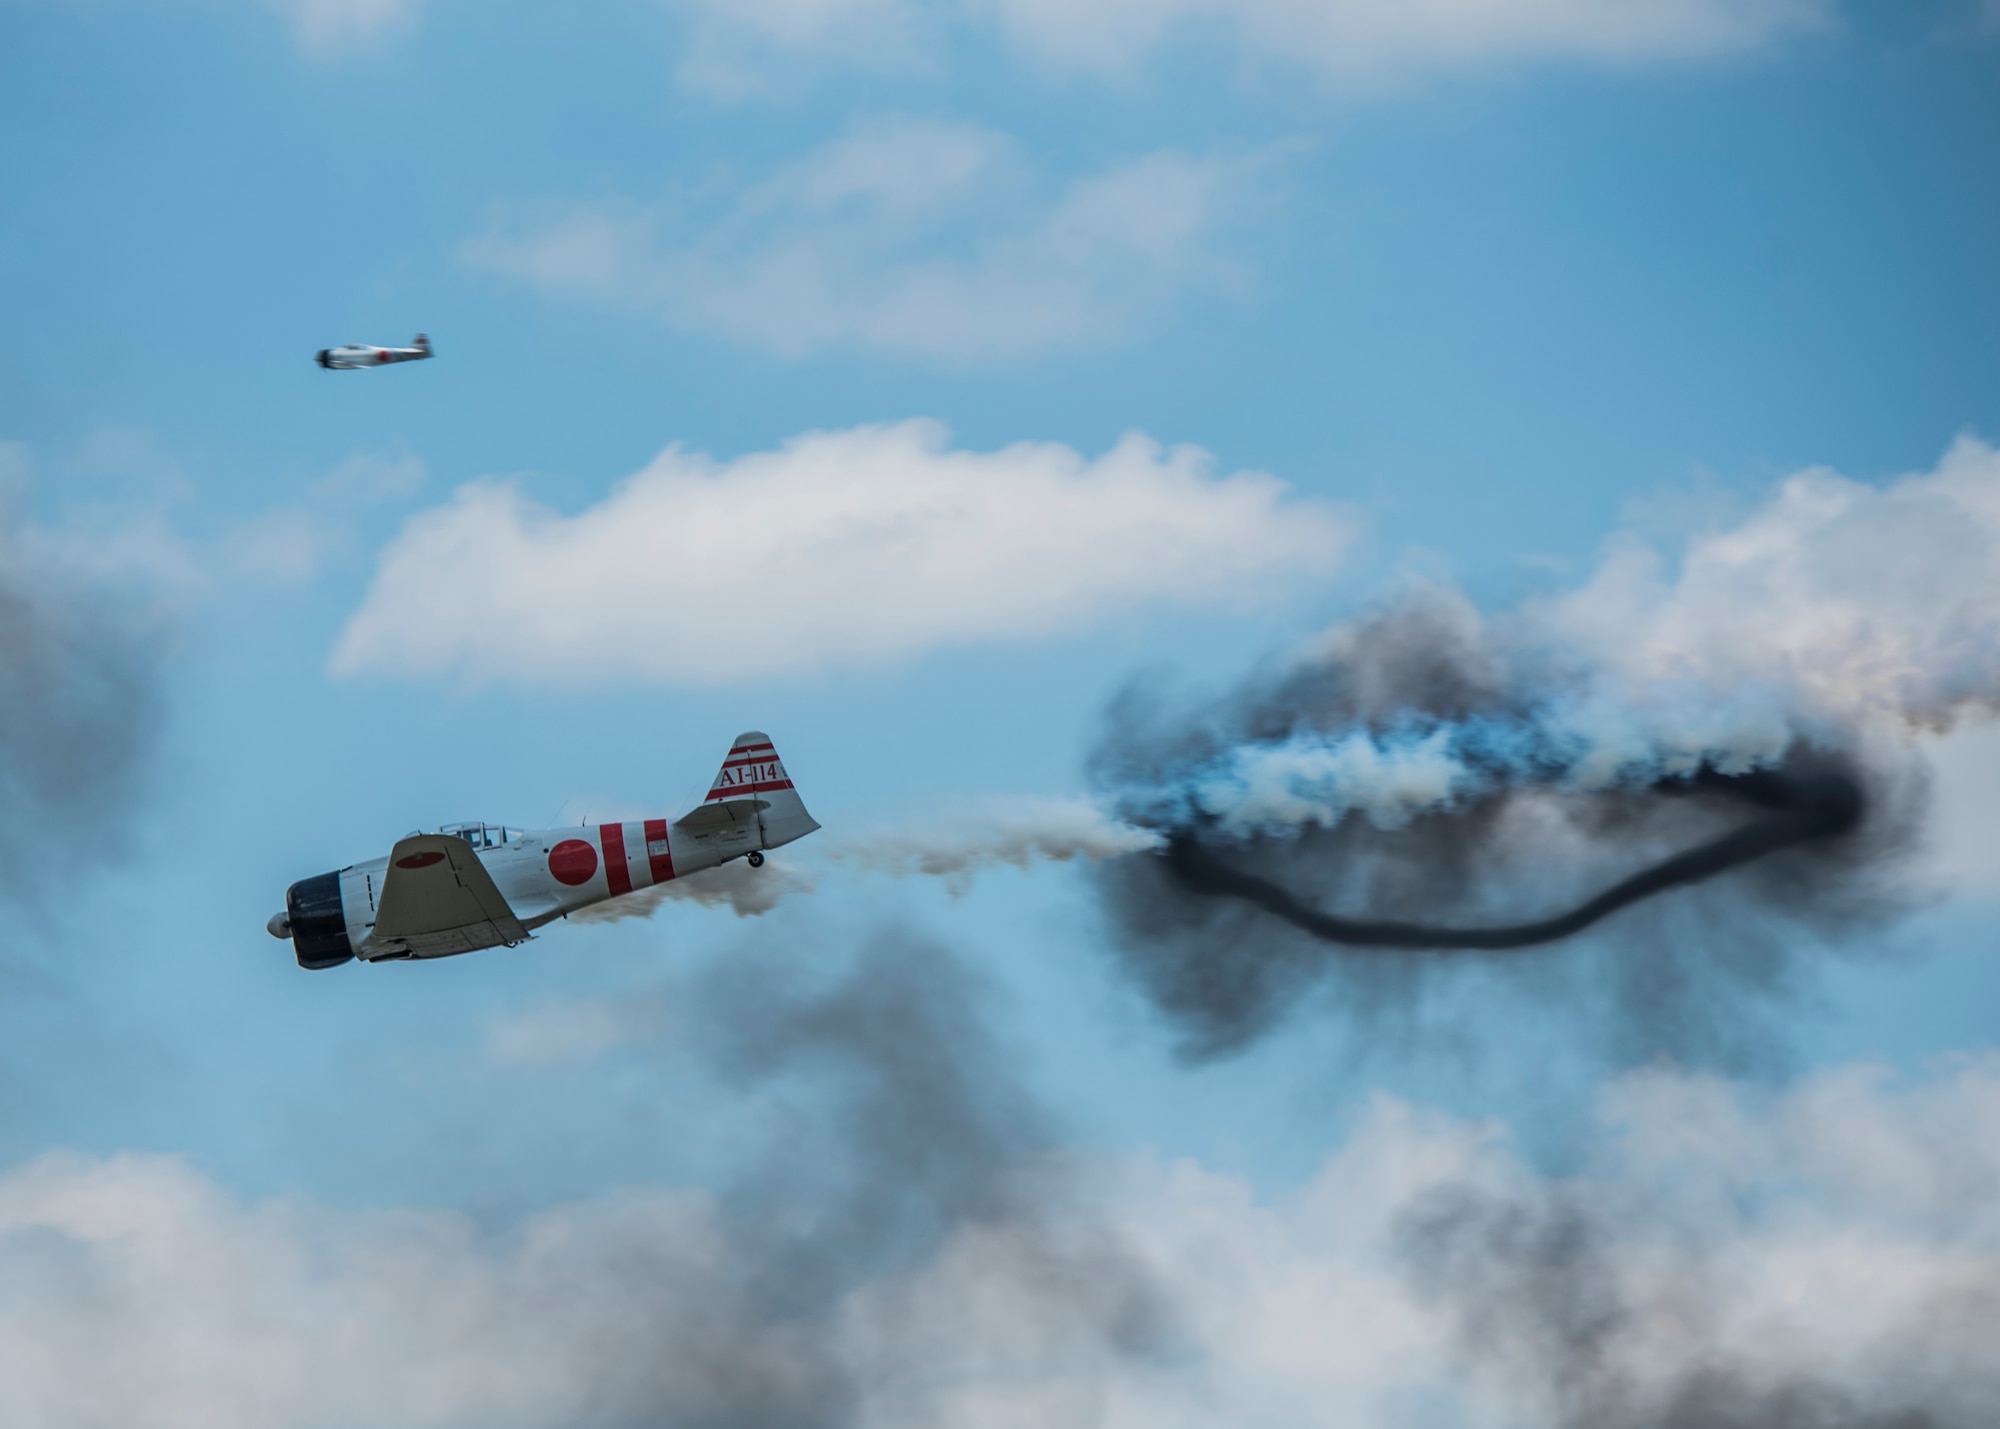 "Tora, Tora, Tora," performs the re-creation of the Dec. 7, 1941, attack on Pearl Harbor during the 100th Centennial Celebration Air Show, June 11, 2017, at Scott Air Force Base, Ill. Tora, Tora, Tora began in 1972, when six replica Japanese aircraft used in the movie of the same name were donated to the CAF. The act debuted at the Galveston Air Show on June 25, 1972 and by 1977, Tora had gained national exposure. In 1991 Tora participated extensively in the 50th anniversary year commemorations of Pearl Harbor.  (U.S. Air Force photo by Staff Sgt. Jodi Martinez)